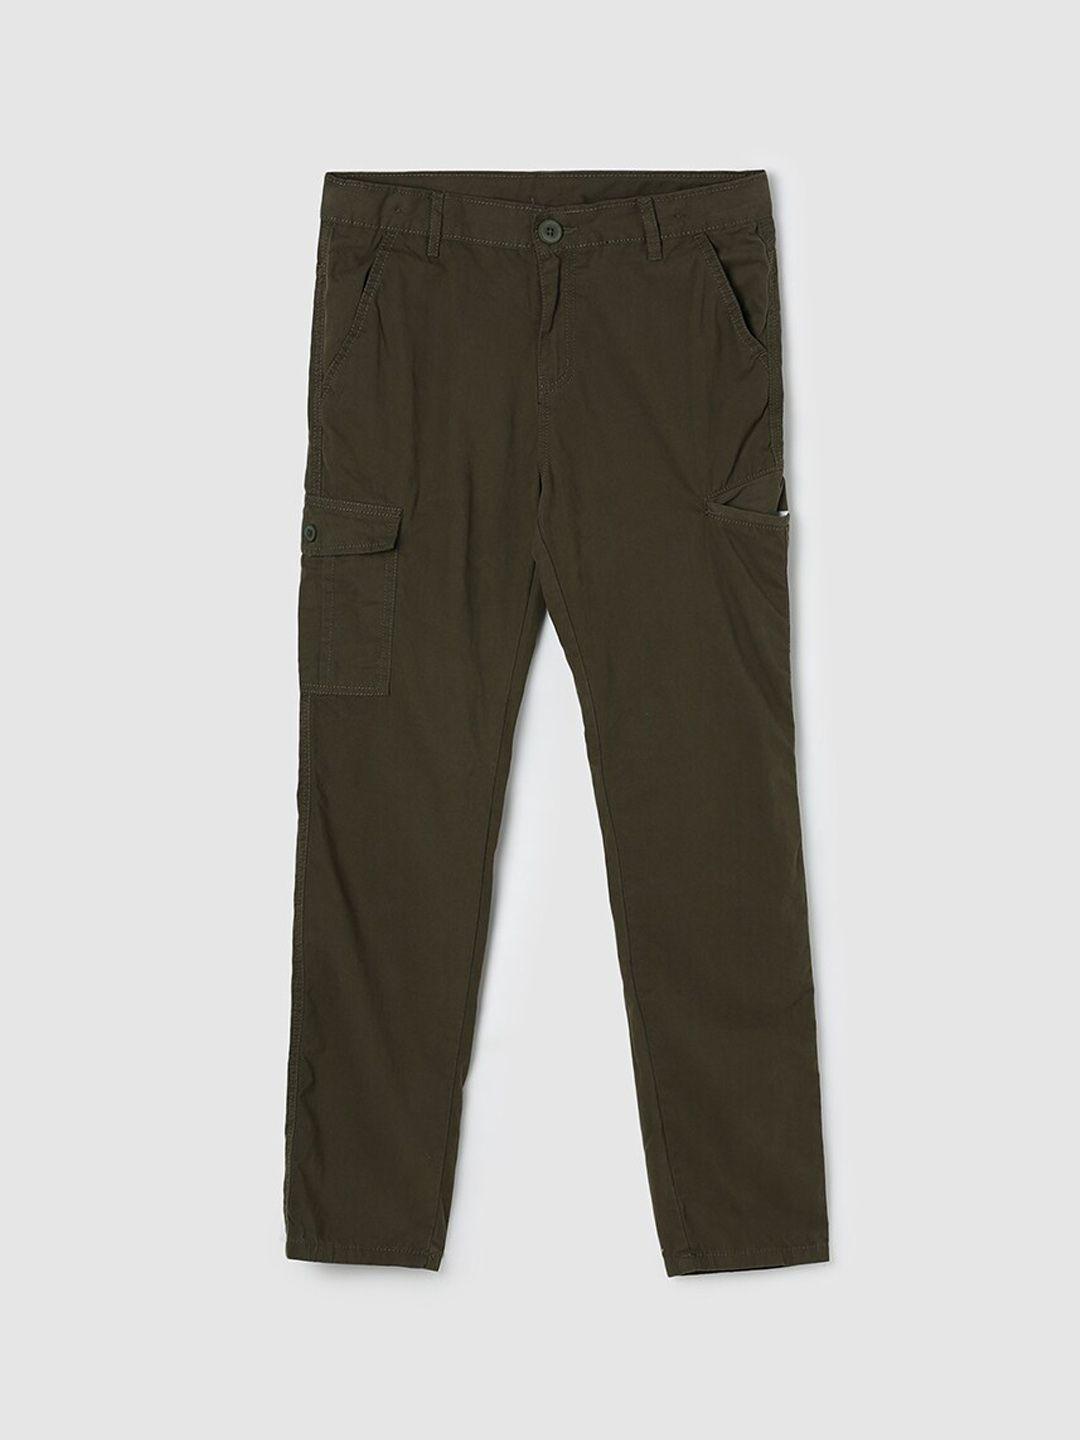 max boys olive green solid regular fit cotton cargo trouser